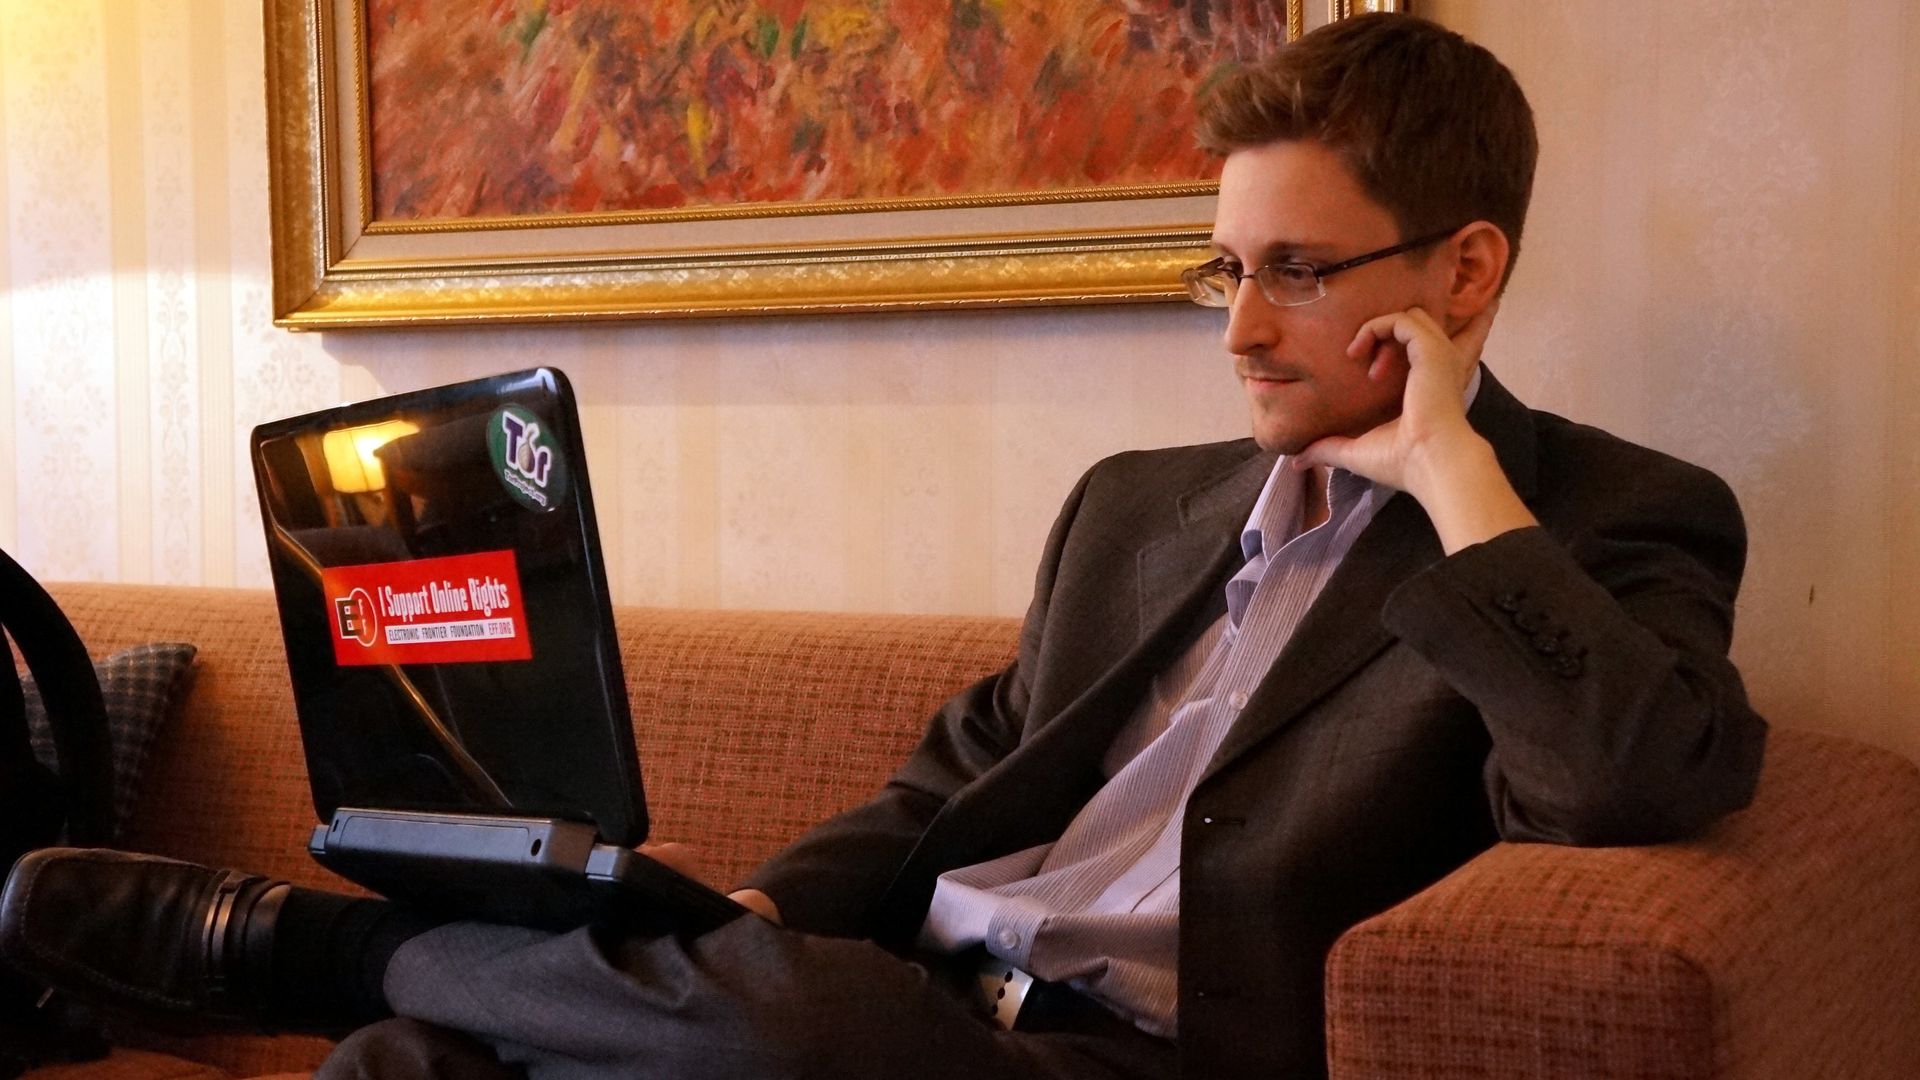 Snowden looking at a laptop.